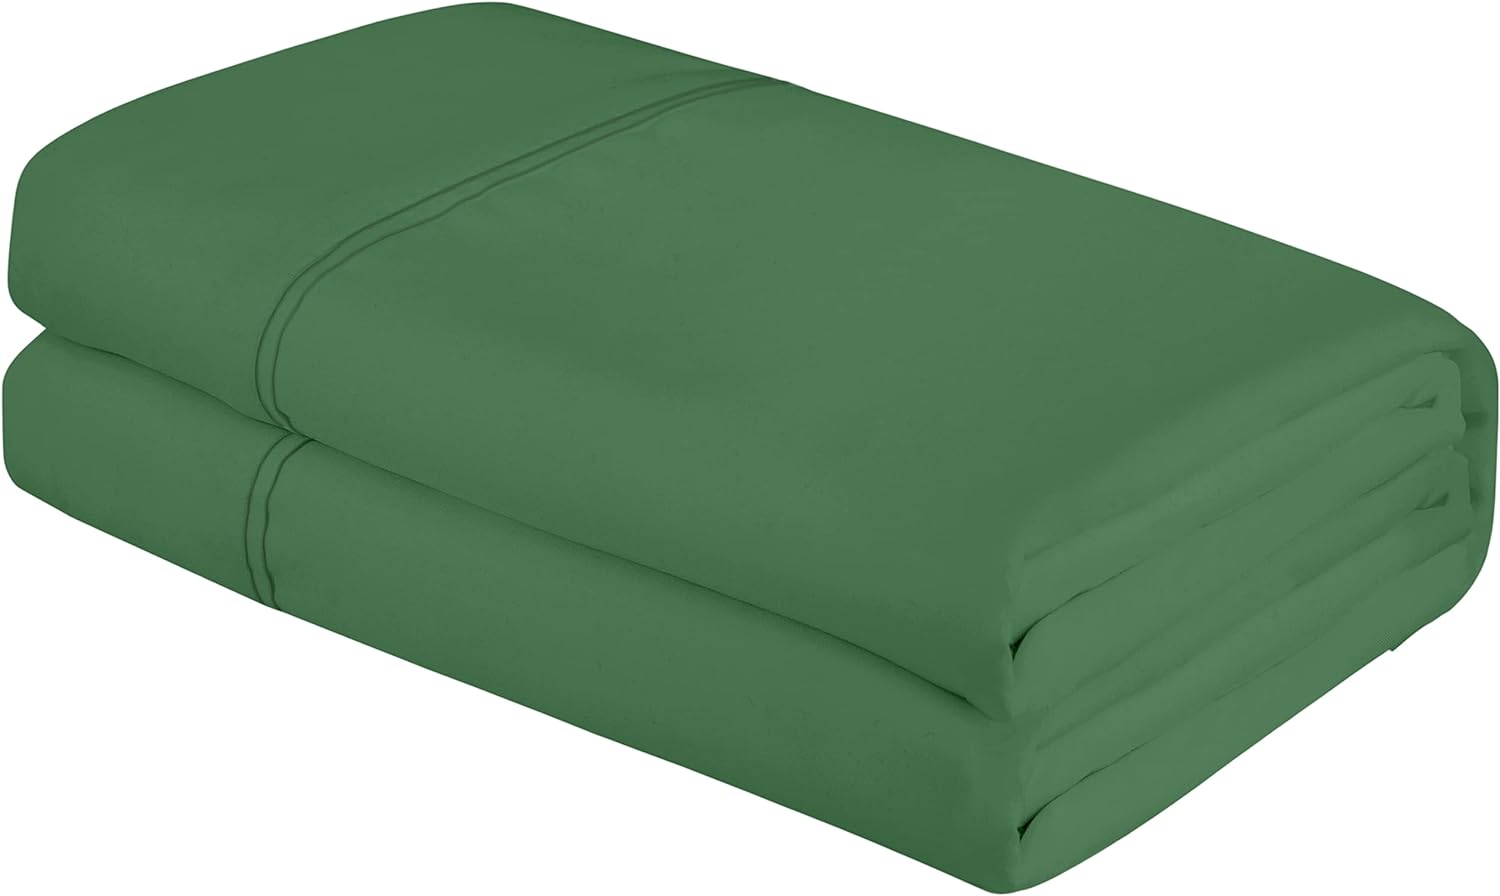 Royale Linens Queen Size Flat Sheet Only - Brushed 1800 Microfiber - Ultra Soft & Breathable - Wrinkle Resistant - Hotel Quality Flat Sheet Sold Separately - Top Sheet for Bed - (Queen, Hunter Green)